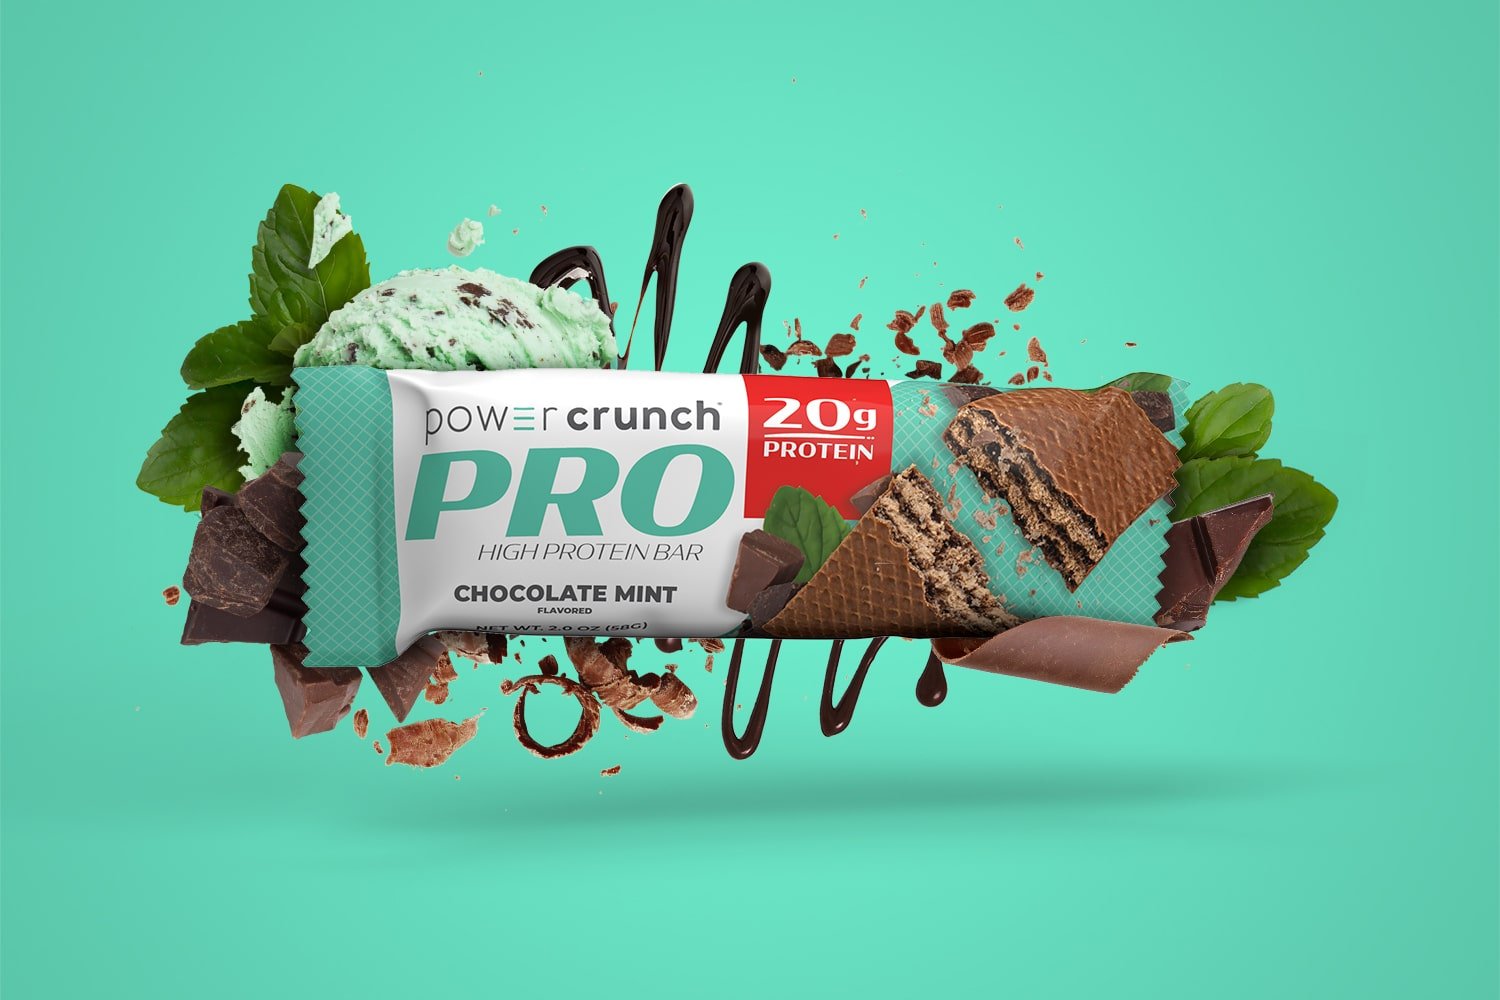 PRO Chocolate Mint 20g protein bars pictured with Chocolate Mint flavor explosion